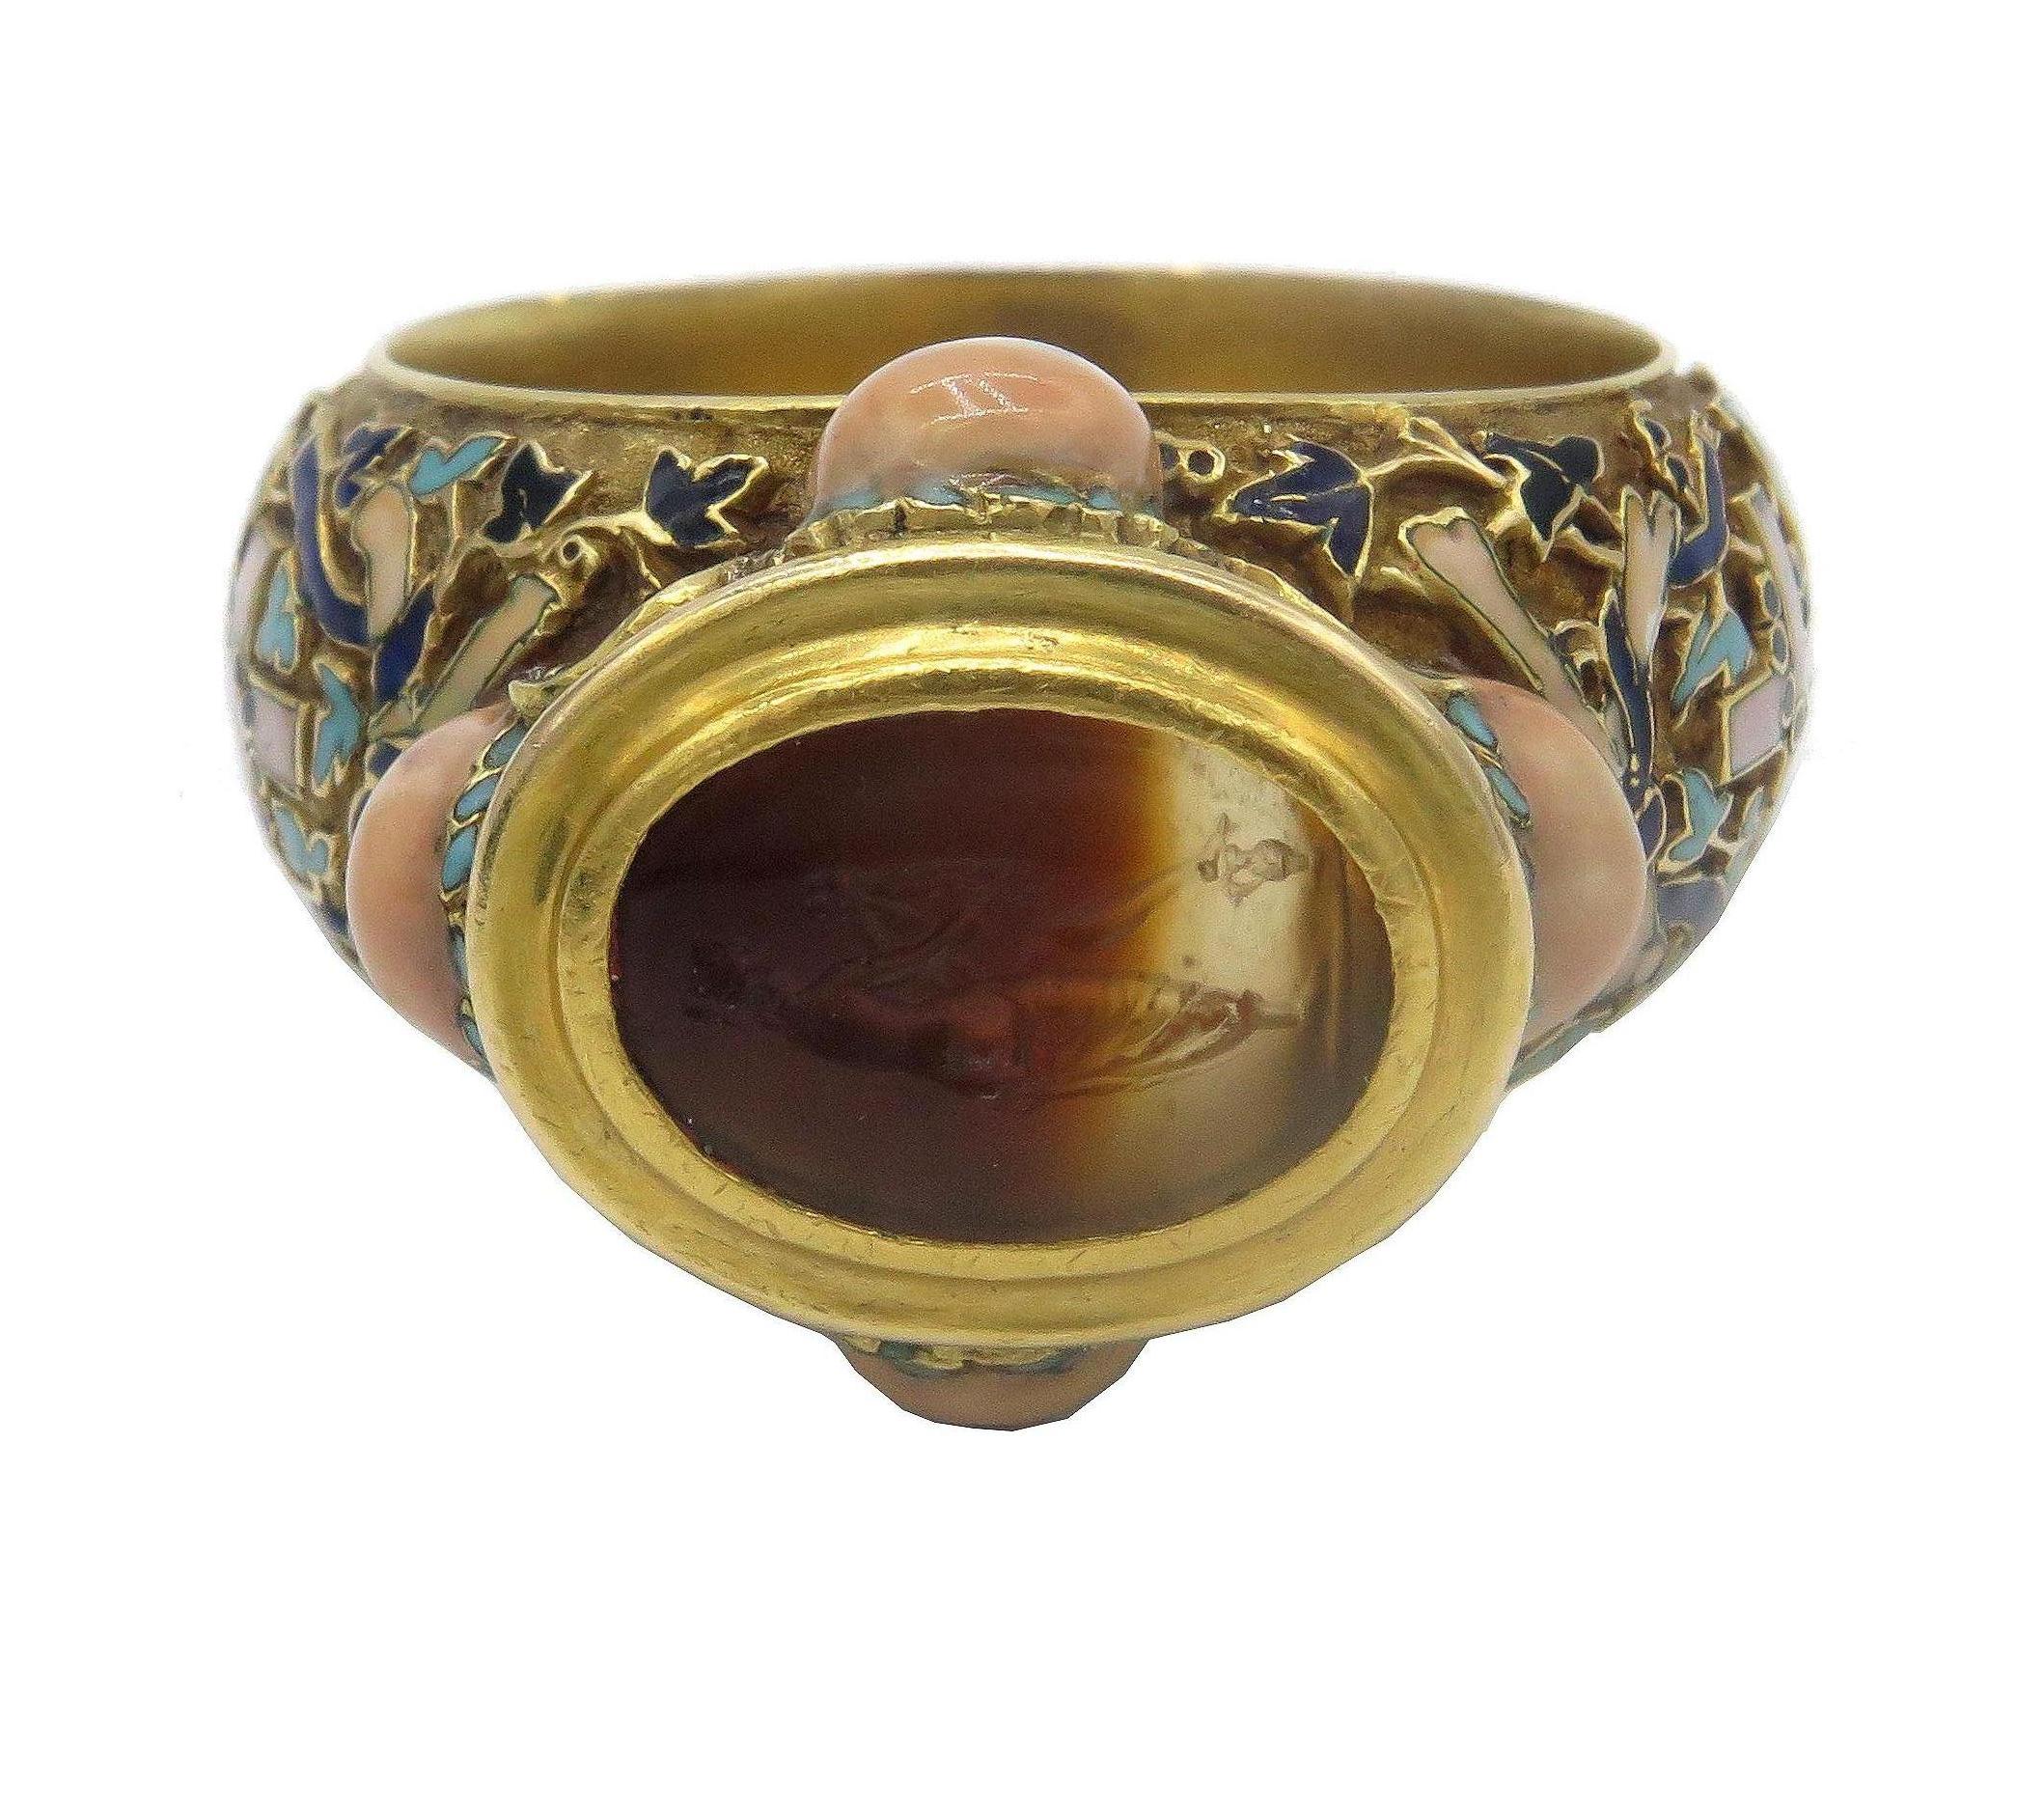 A 19th-Century gold ring that is the reinterpretation of a Memento Nori design by Gille Legare. The sides are enameled with death's heads and the hoop with cross, rosary and gravedigger's implements. The similarity between this ring and the Legare